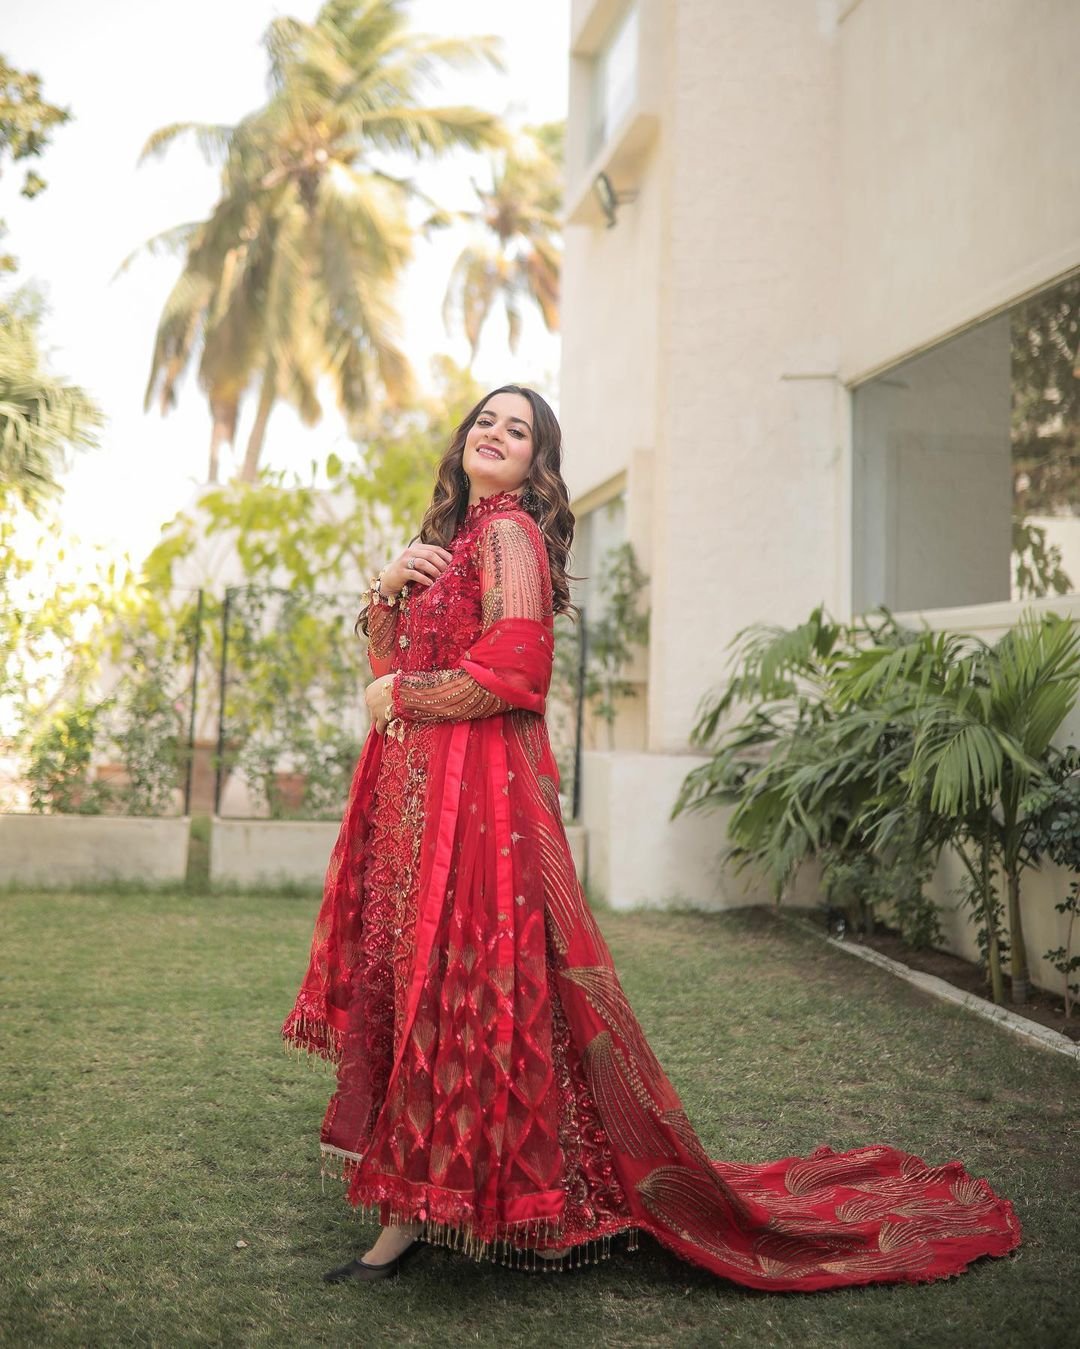 Aiman Khan Uber chic pictures in Red outfit